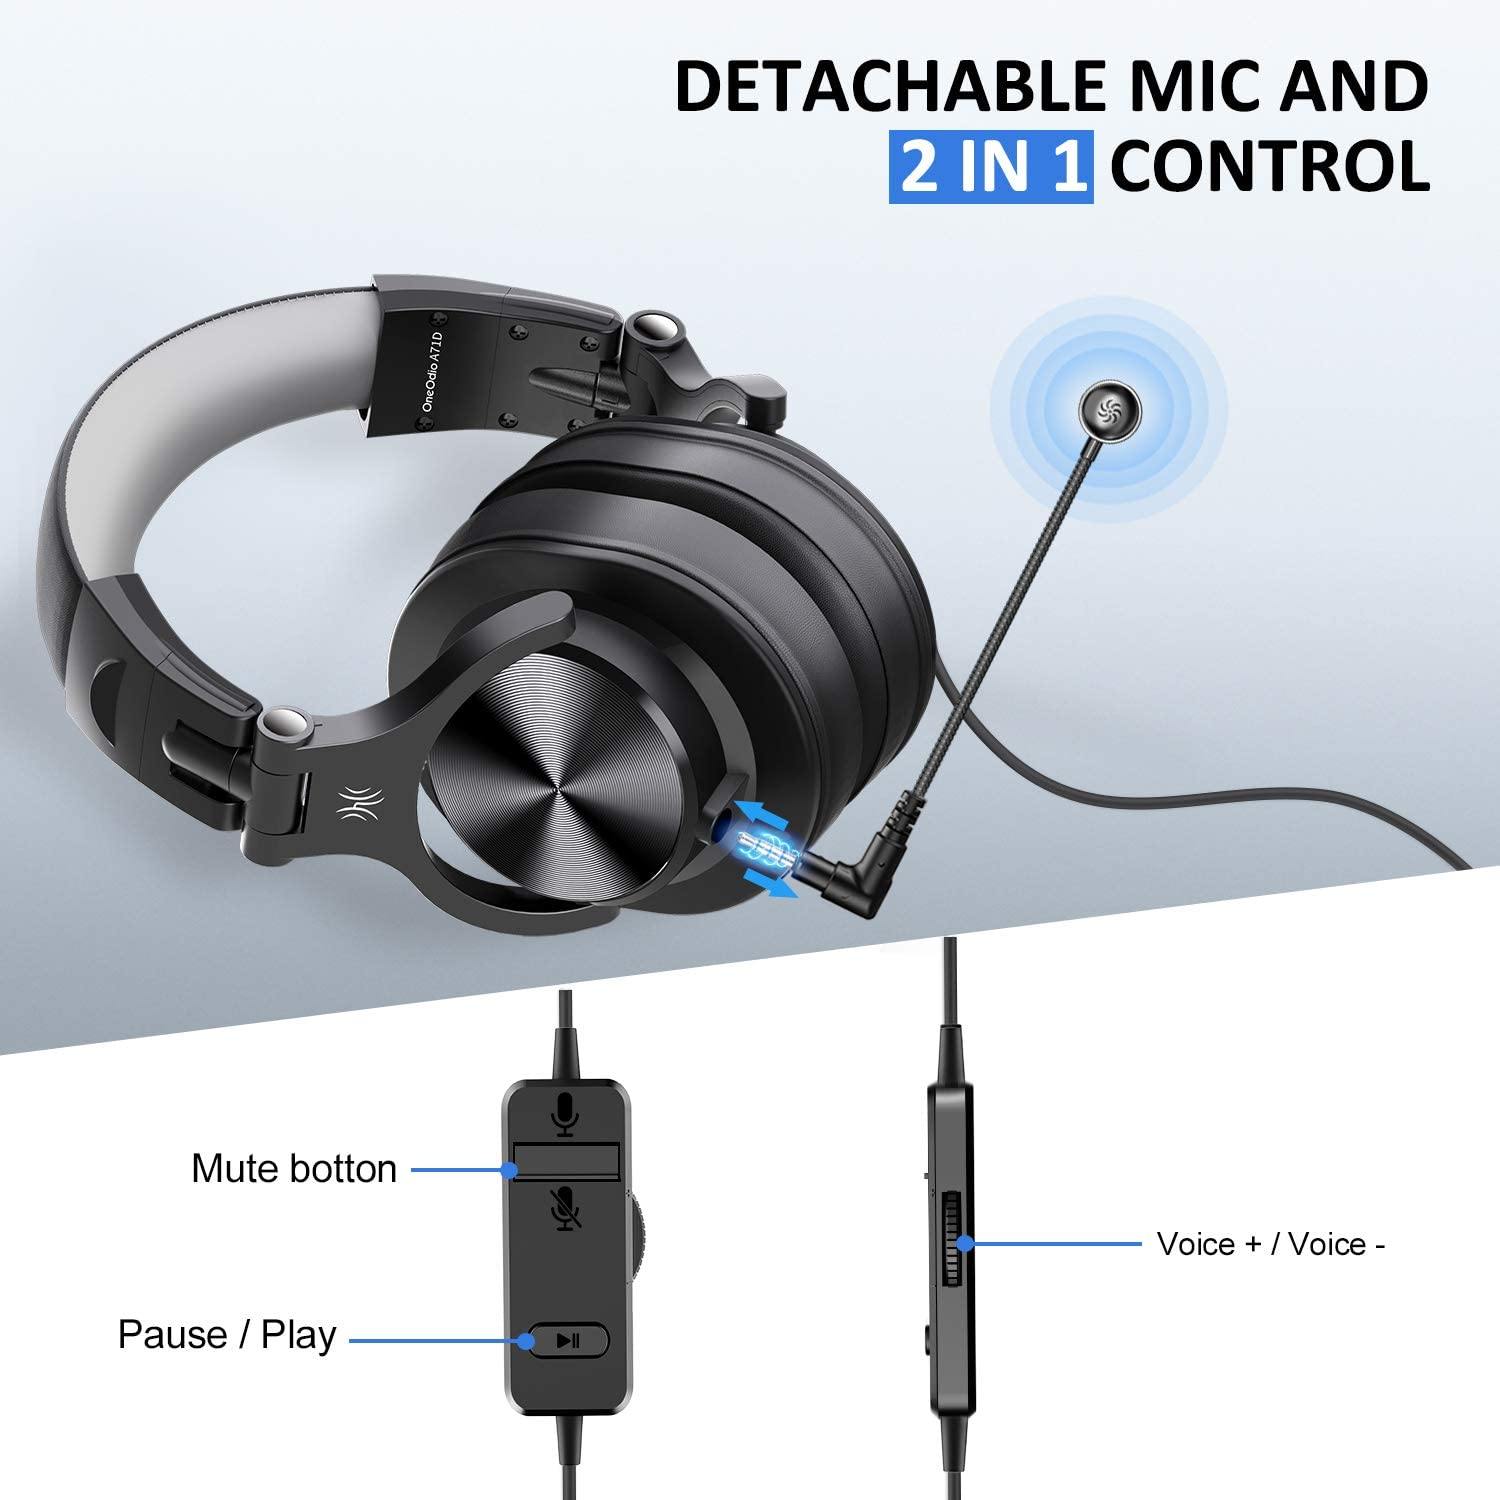 Oneodio-A71D-Gaming-Headsets-Over-Ear-3D-Stereo-Wired-Study-Headphones-With-Detachable-Microphone-fo-1921457-4